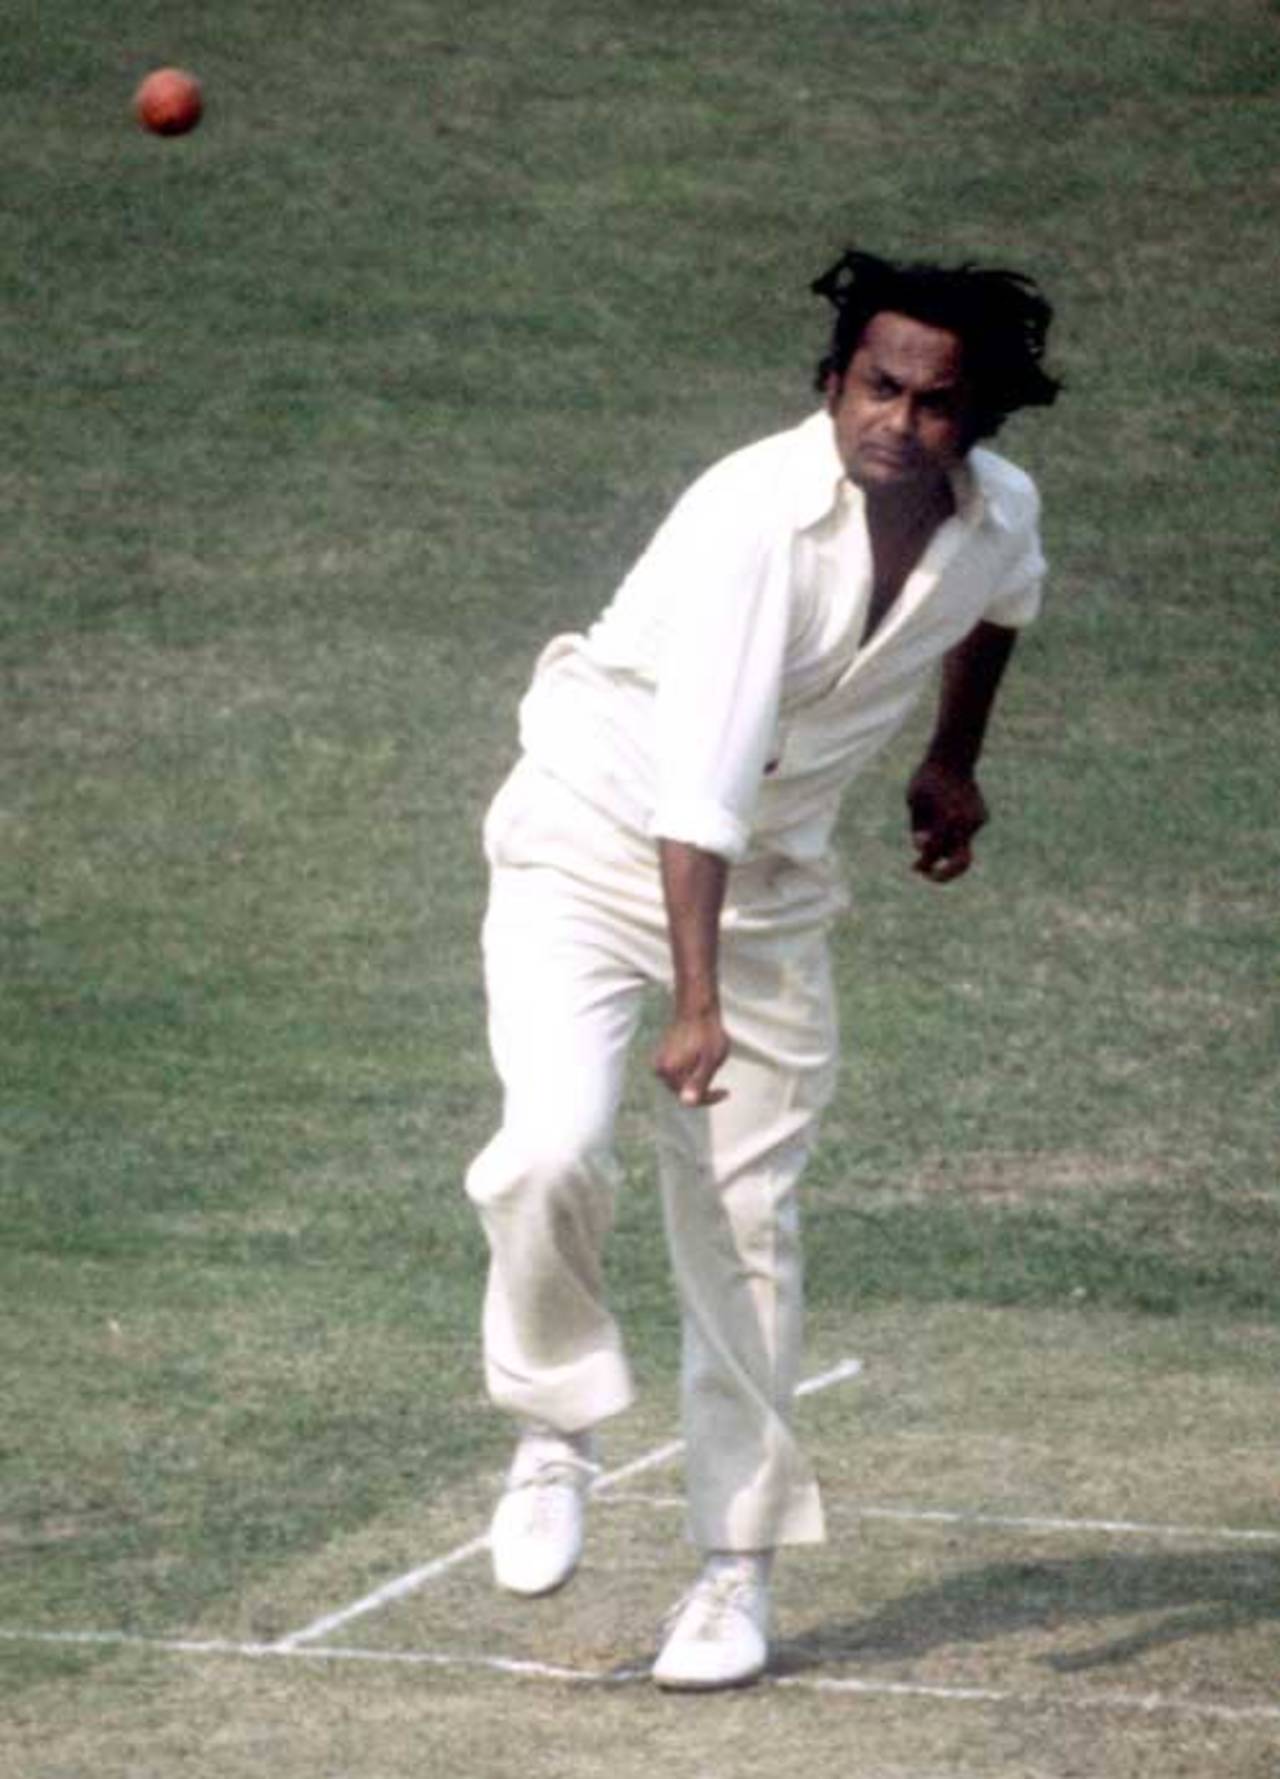 Prasanna was forever trying to improve as a bowler, even in his last match&nbsp;&nbsp;&bull;&nbsp;&nbsp;PA Photos